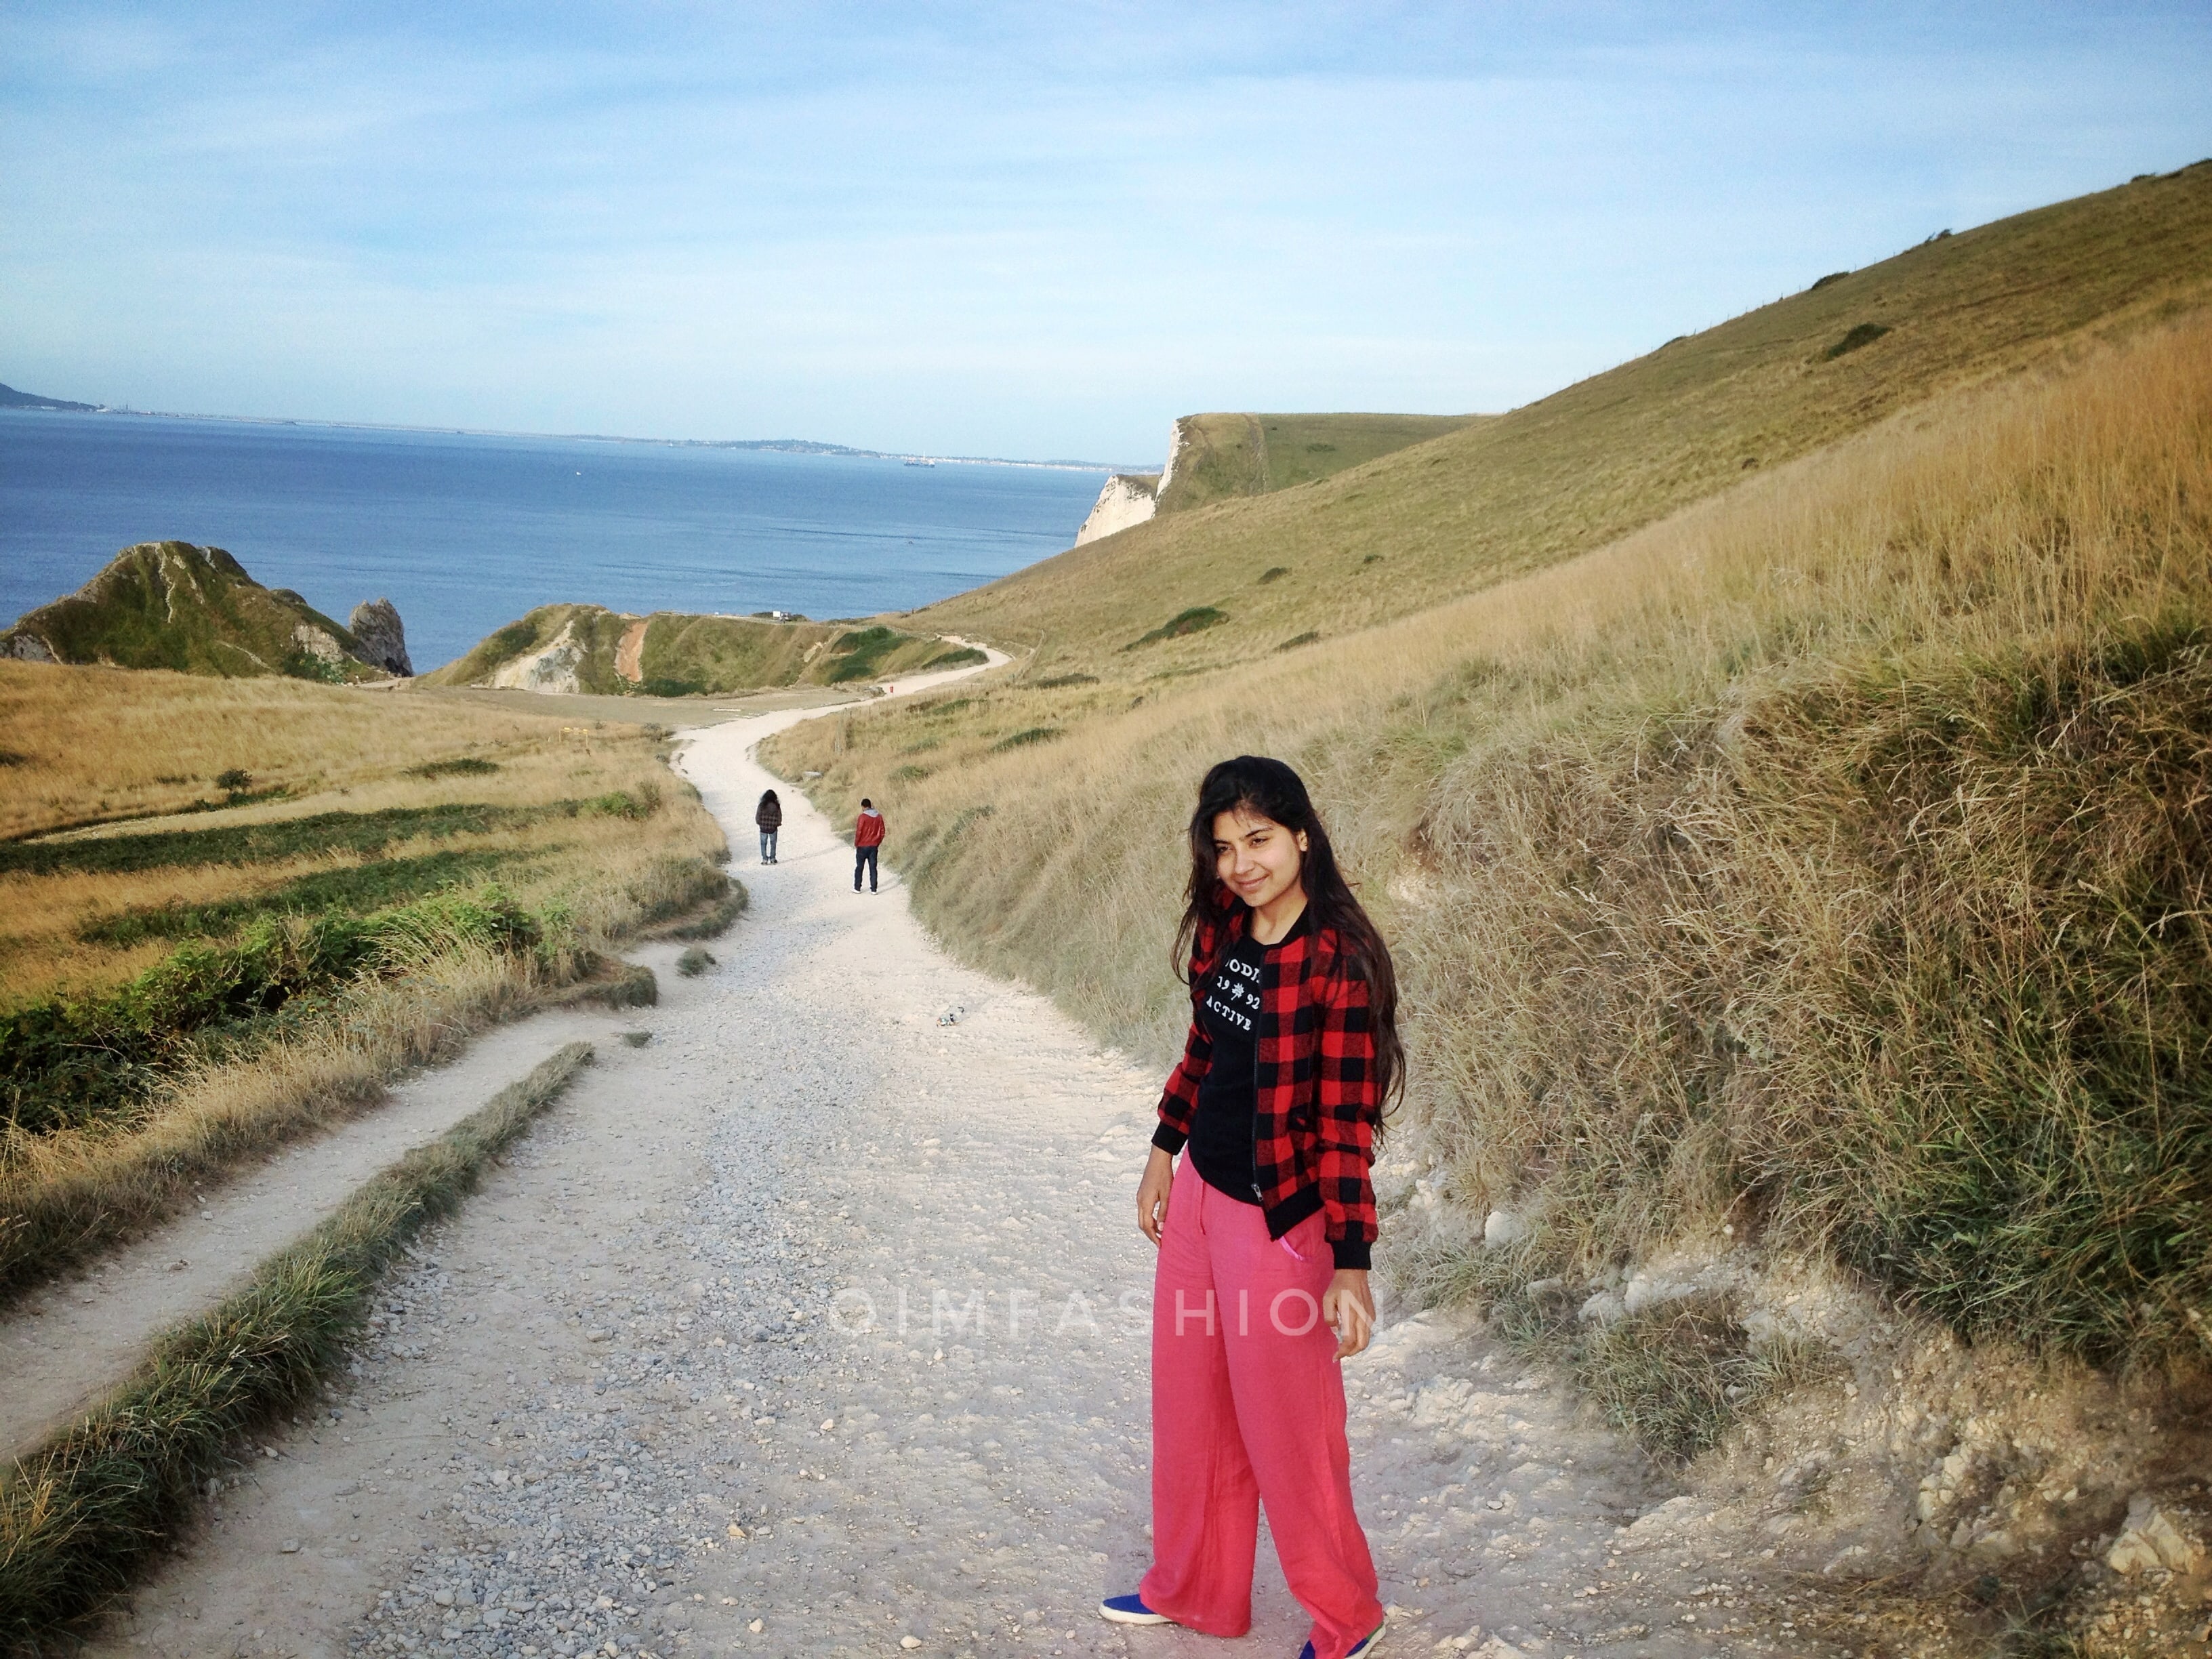 whwre is durdle door, where is lulworth cove, what is durdle door, How to reach durdle door, dorset, best beaches in the world, best beaches in england, best tourist places in england, visit England, best places to go in the world, most beautiful seaside in the world, travel bloggers Indian, Indian travel Bloggers, Ritu Pandit, Oimfashion travel